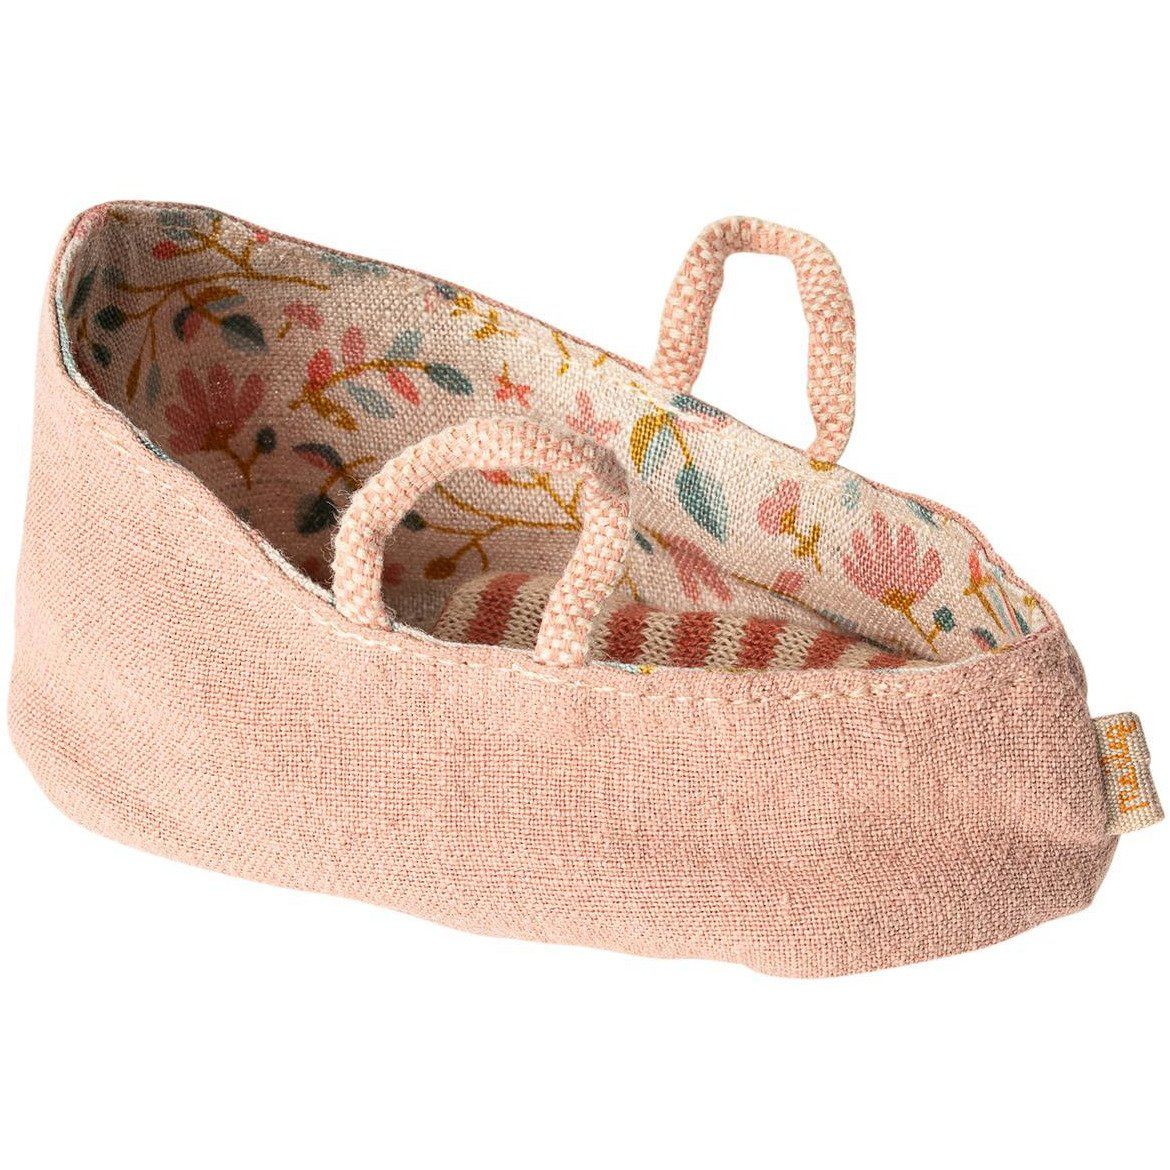 Maileg My Carry Cot - Misty Rose